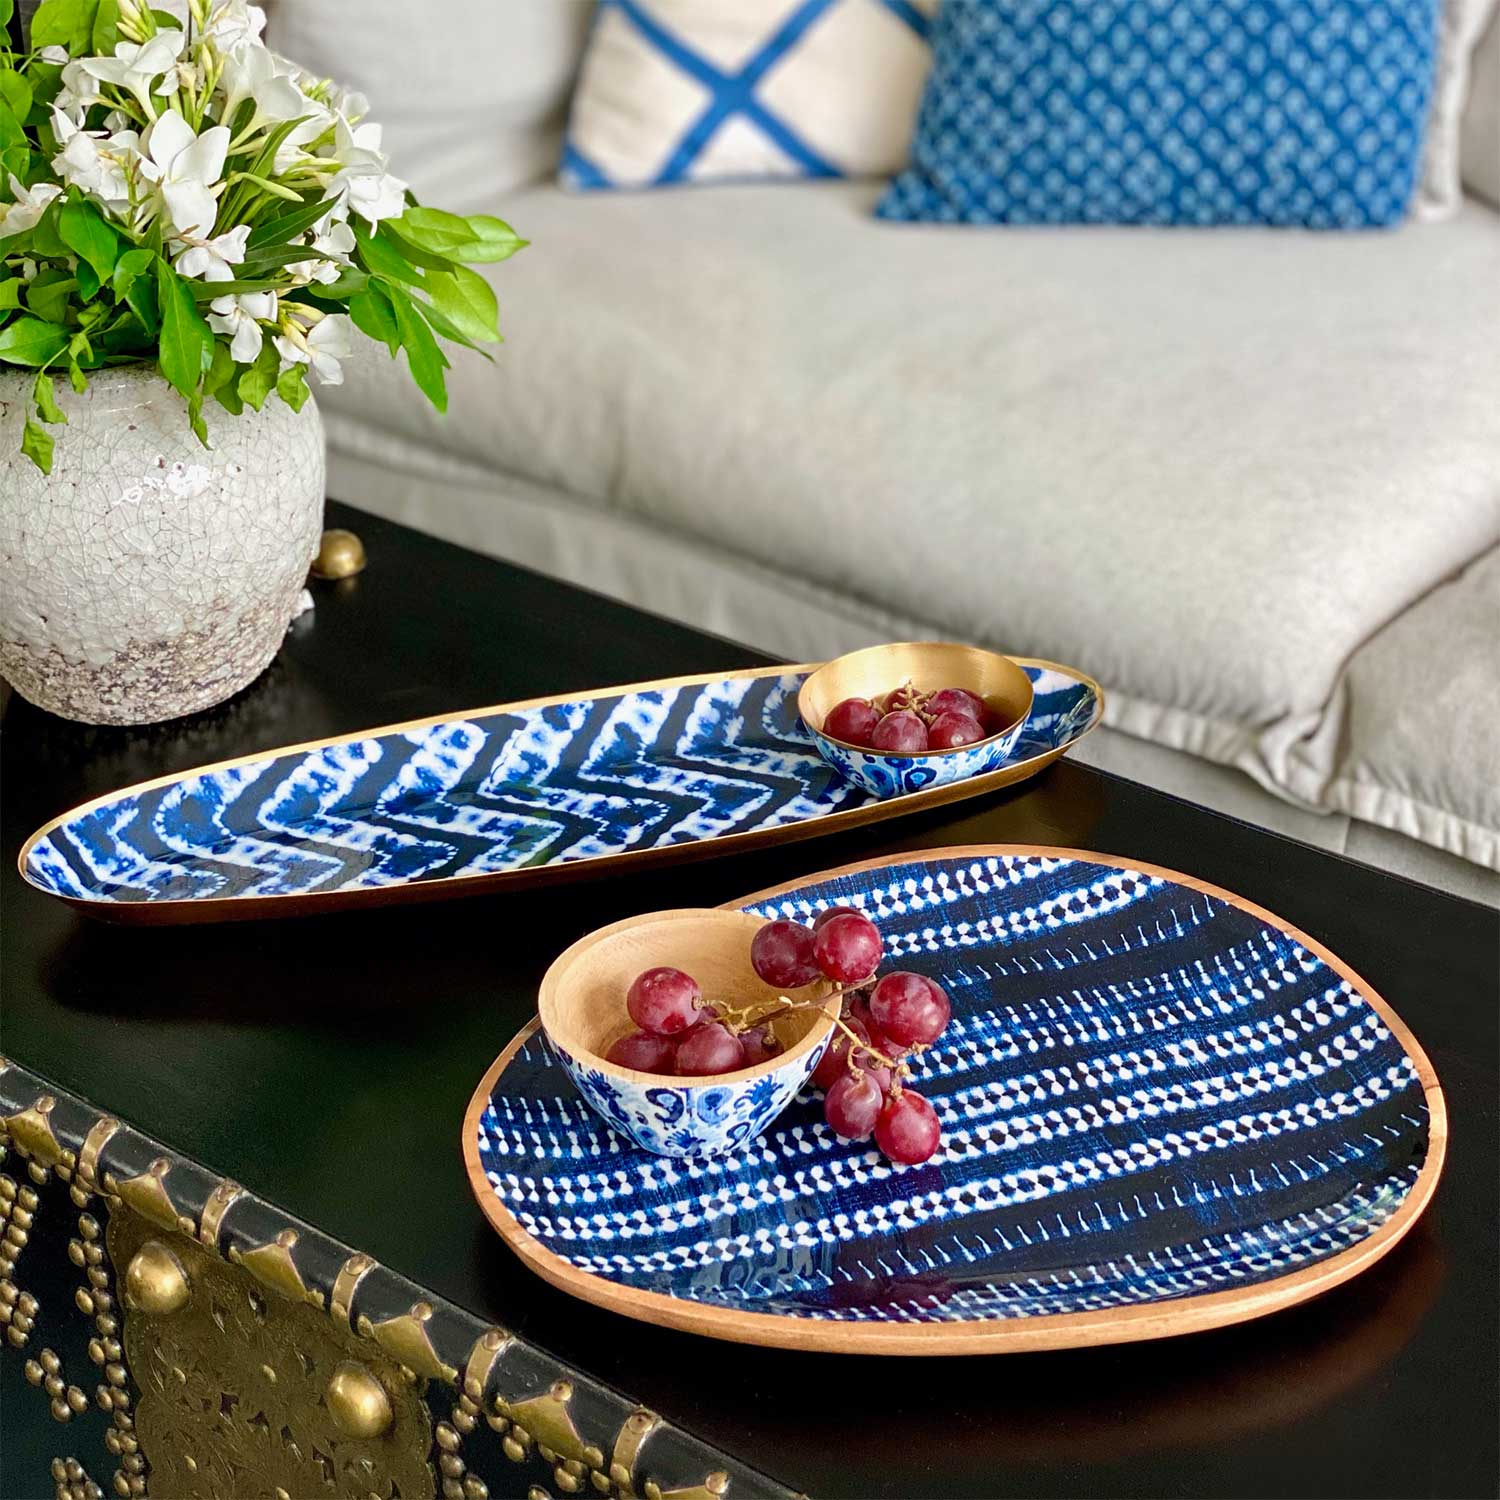 Oval Platters With Dip Bowls, Gift Set of 2 - Bali Island